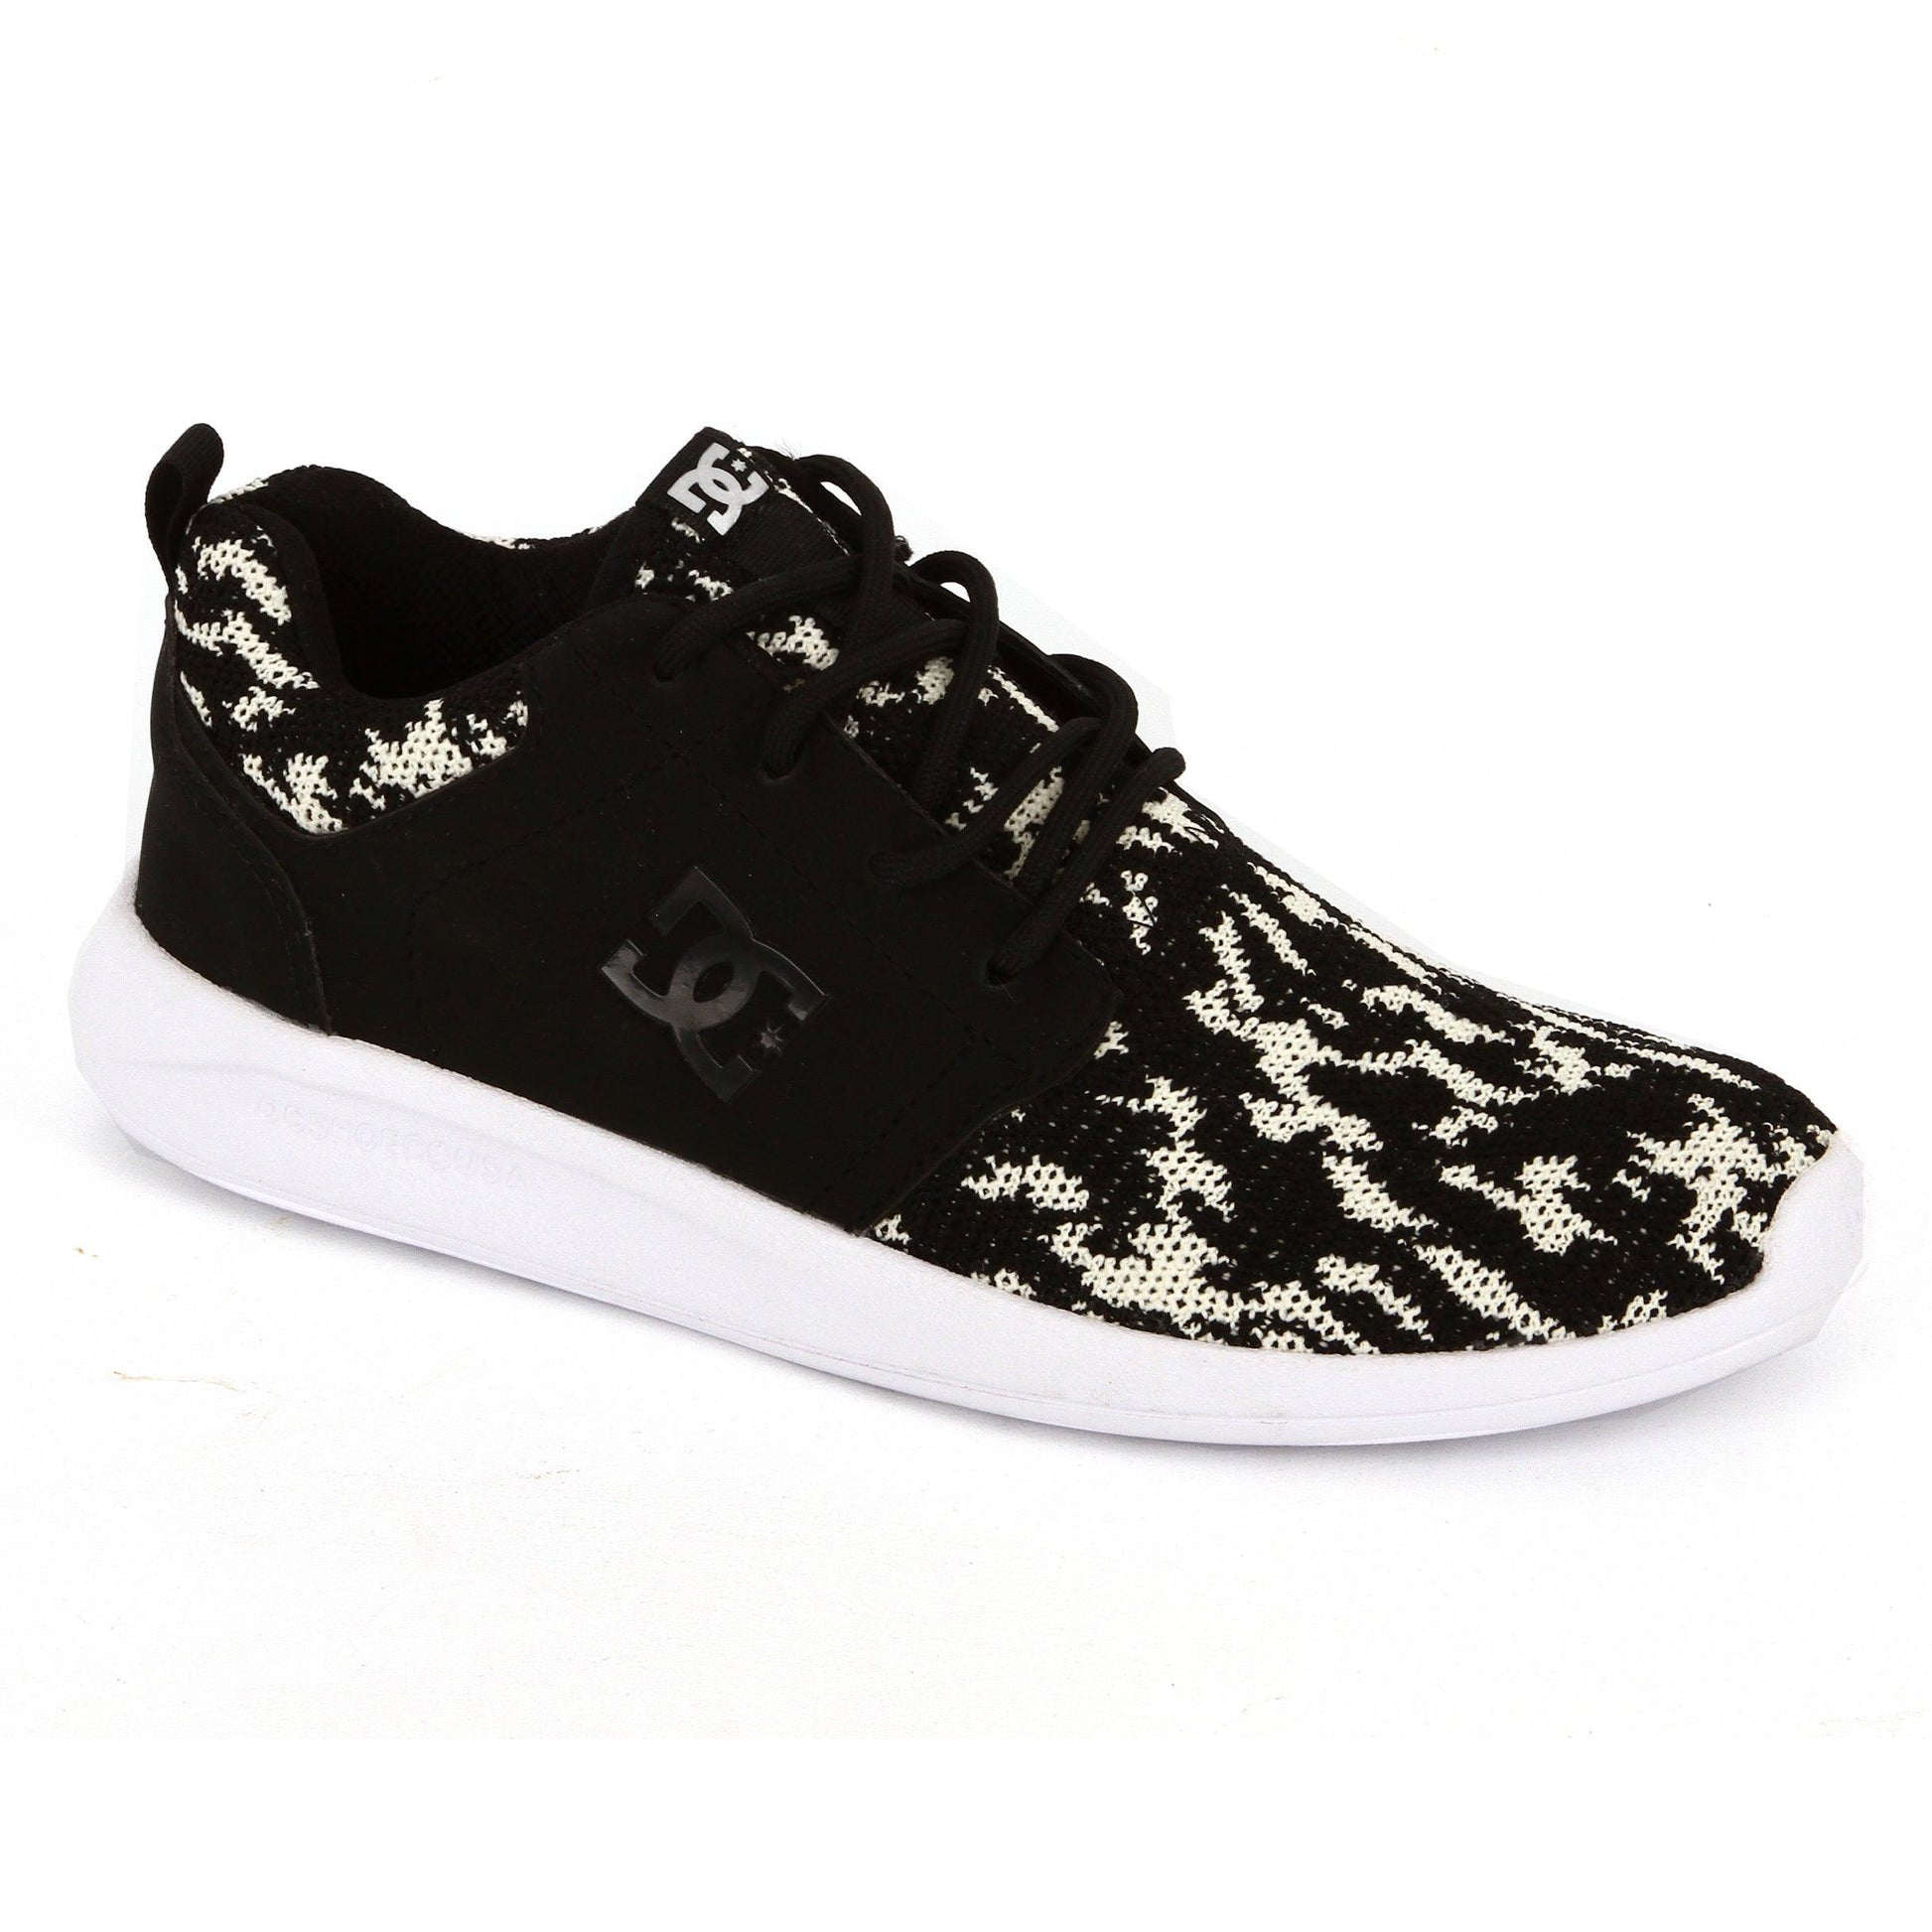 Zapatillas Dc Midway Sn Girl Negro Print - Indy